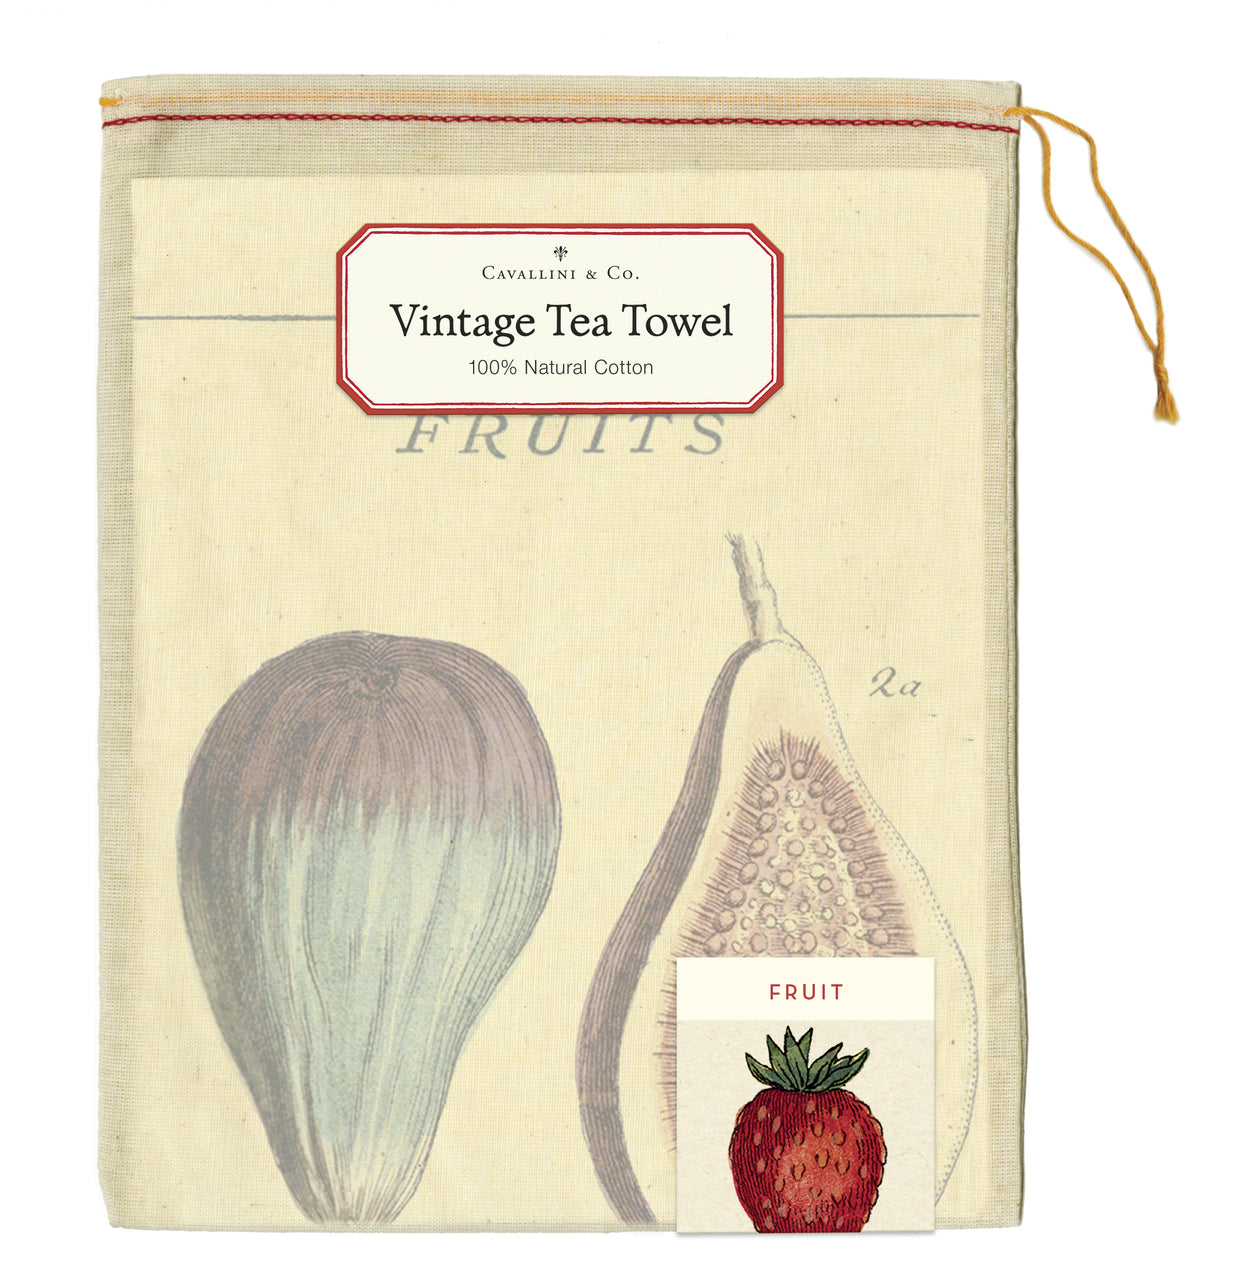 Tea towels come packaged in a hand- sewn muslin bag, making them the perfect gift.